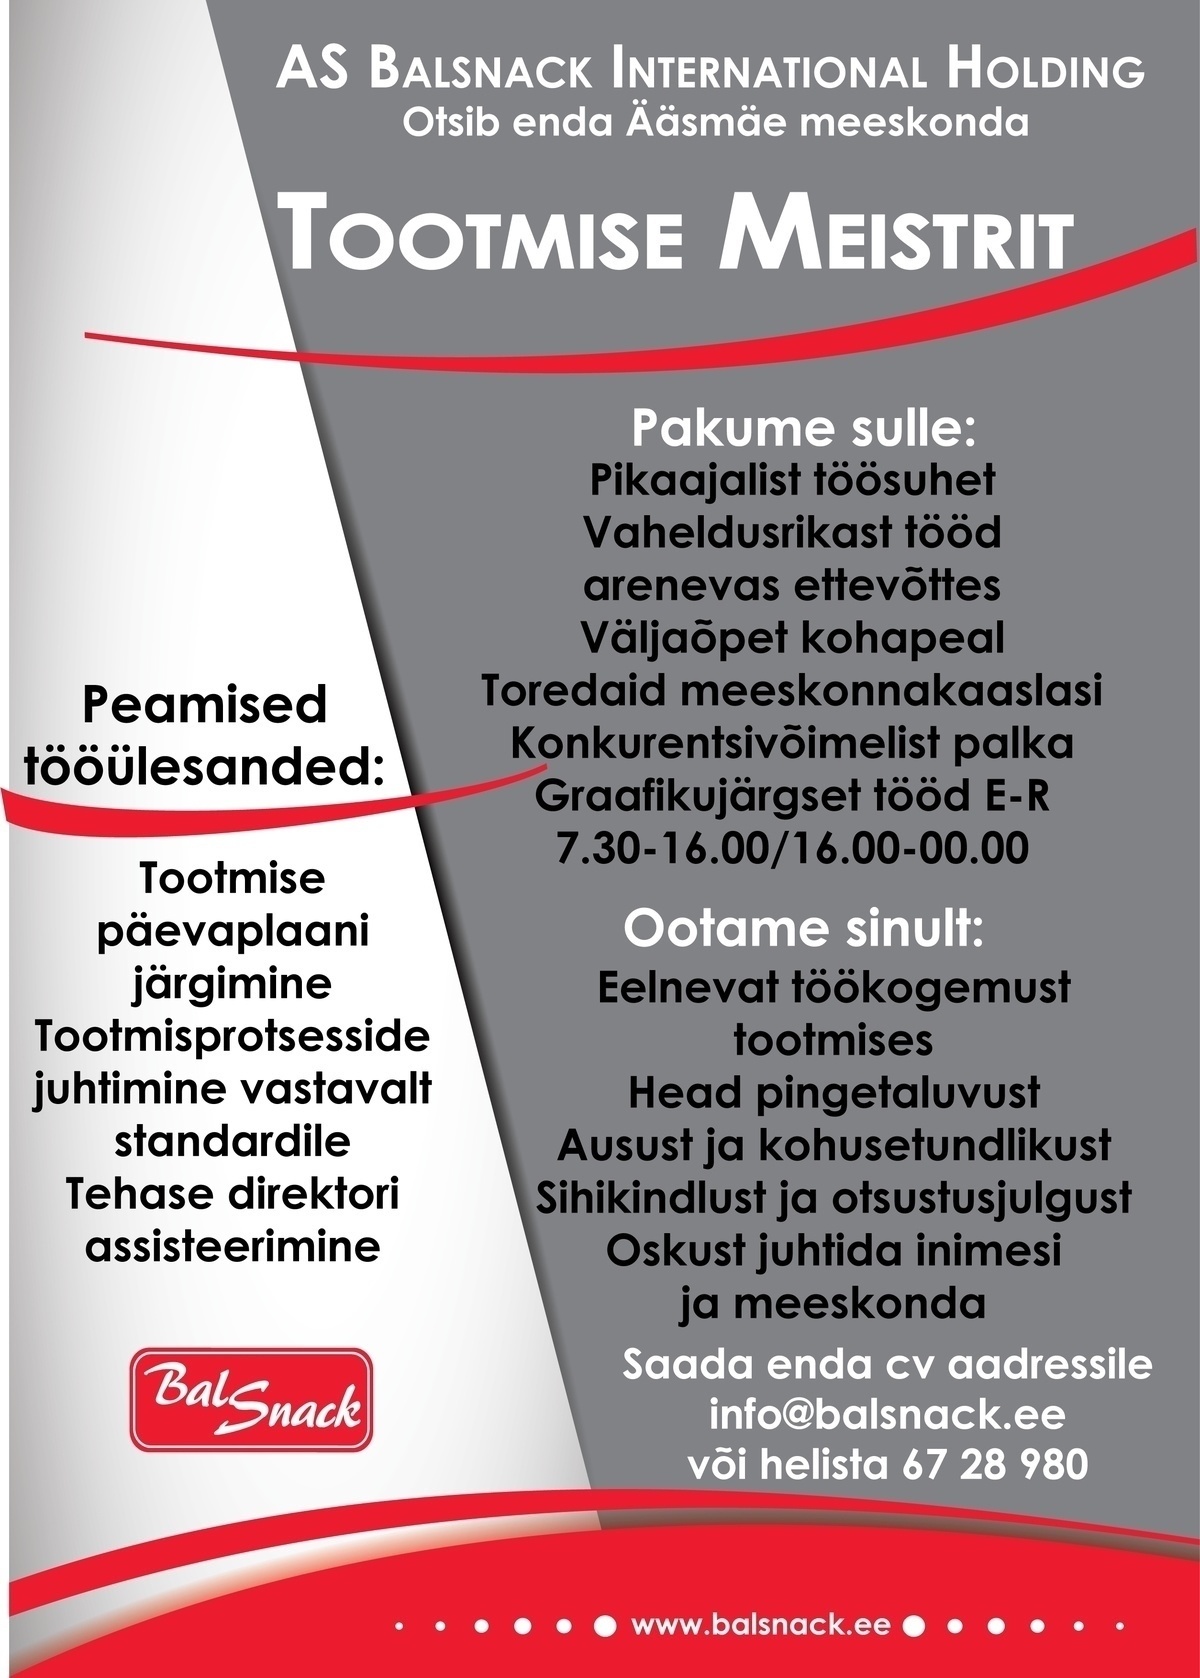 Balsnack International Holding AS Tootmise meister